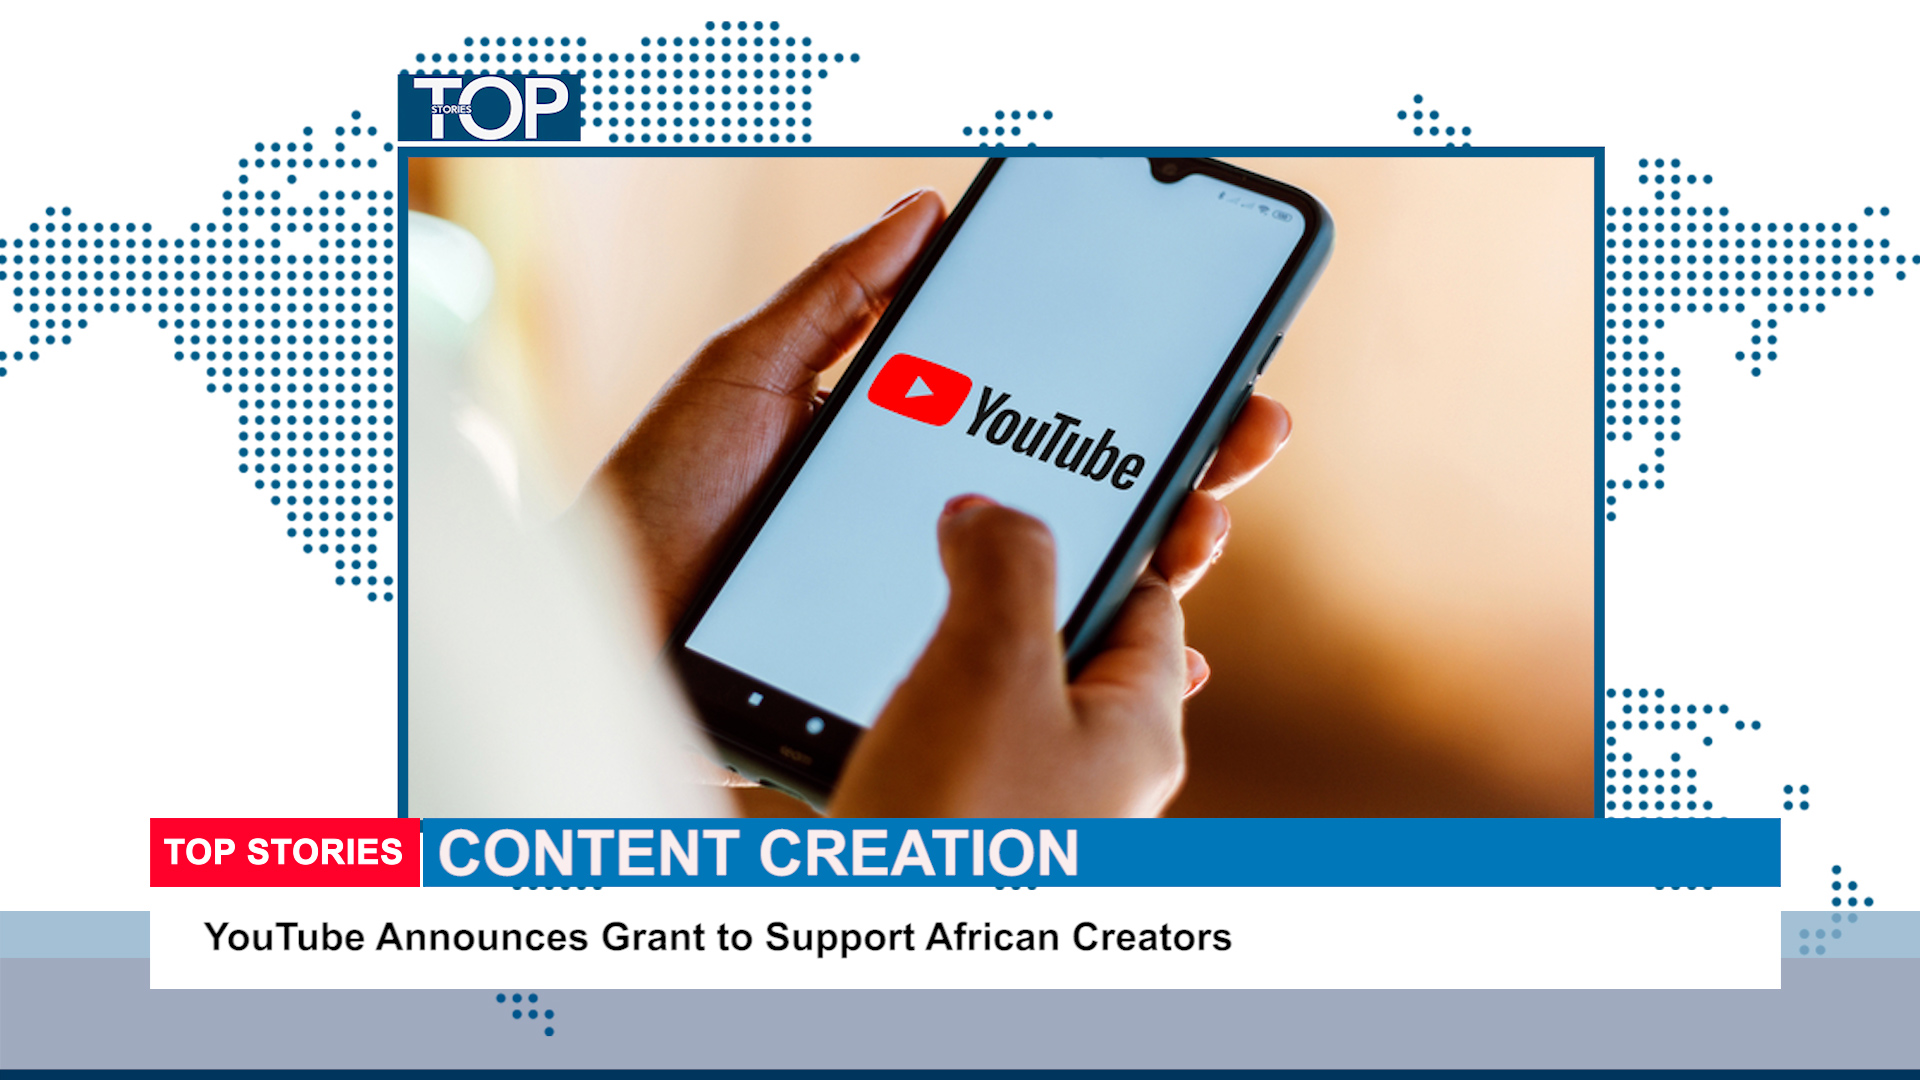 Top STORES | CONTENT CREATION

YouTube Announces Grant to Support African Creators